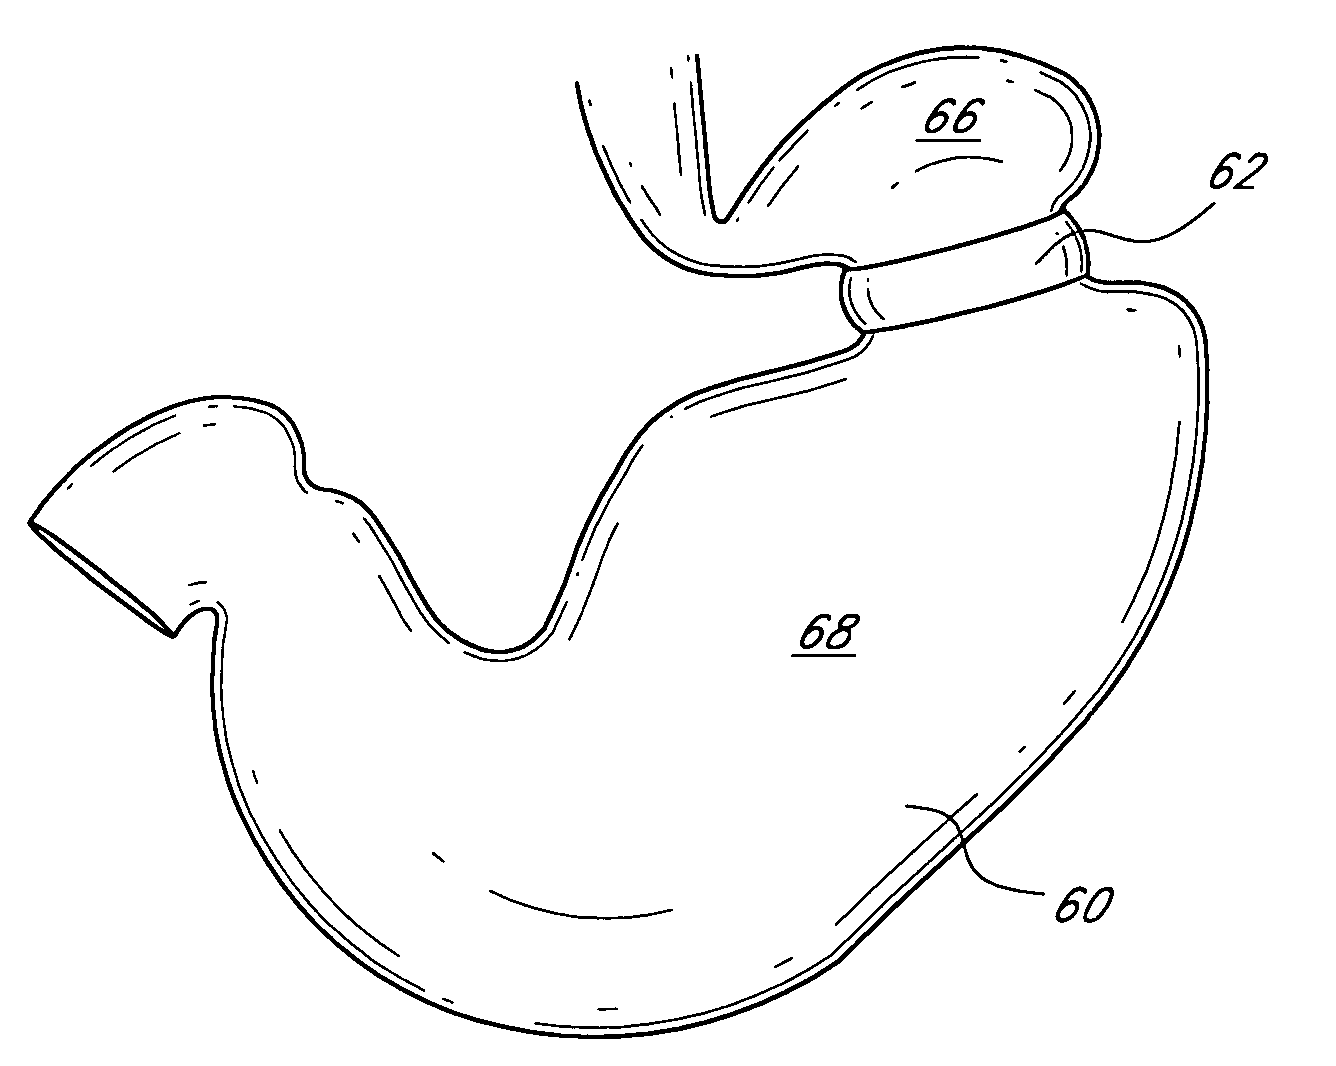 Dynamically adjustable gastric implants and methods of treating obesity using dynamically adjustable gastric implants